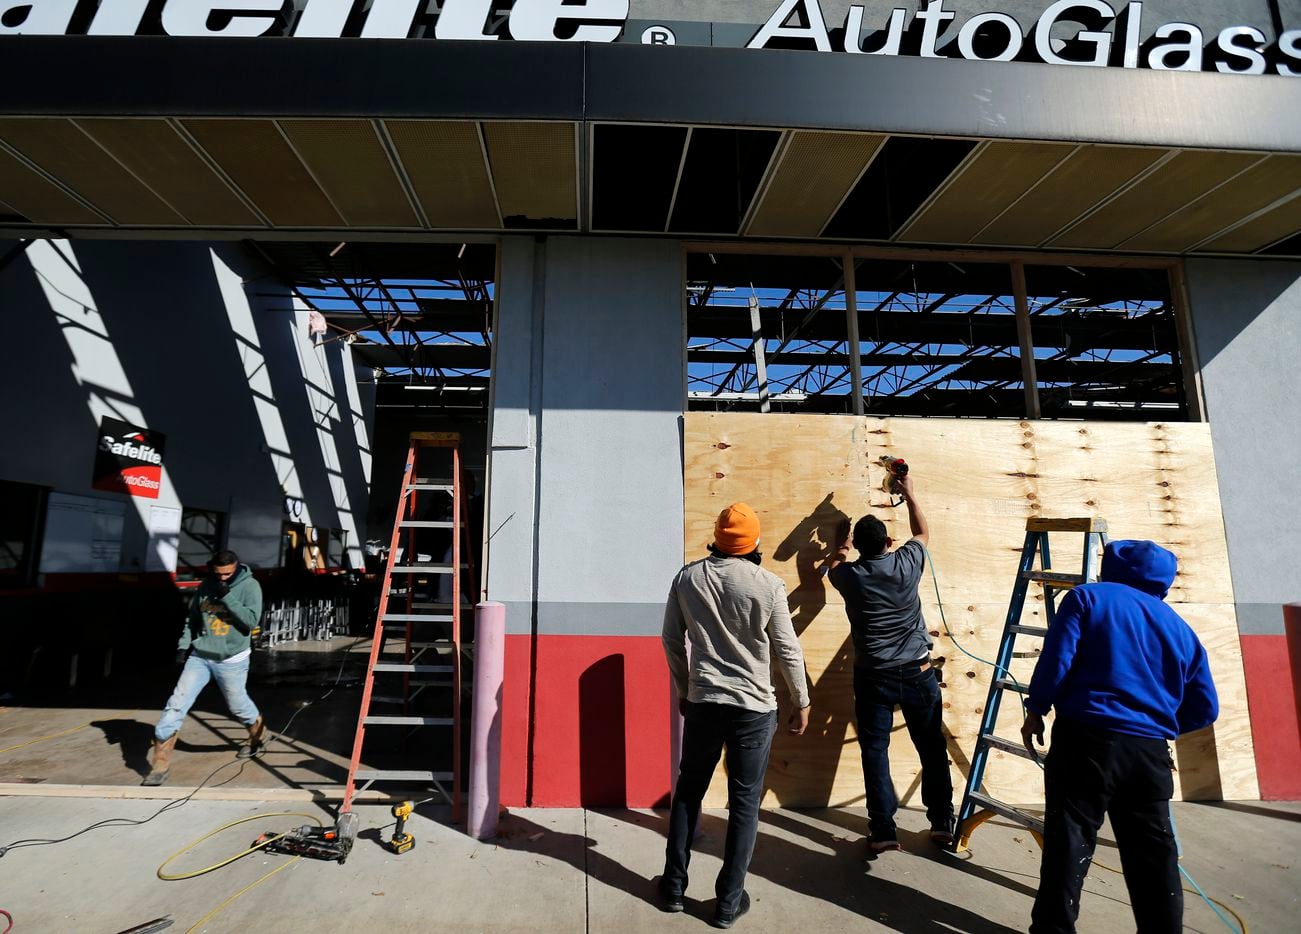 The crew from Remodel One board up the Safelite Auto Glass shop on S. Cooper St., Wednesday, November 24, 2020, after it was damaged in the tornado-warned storm Tuesday evening.